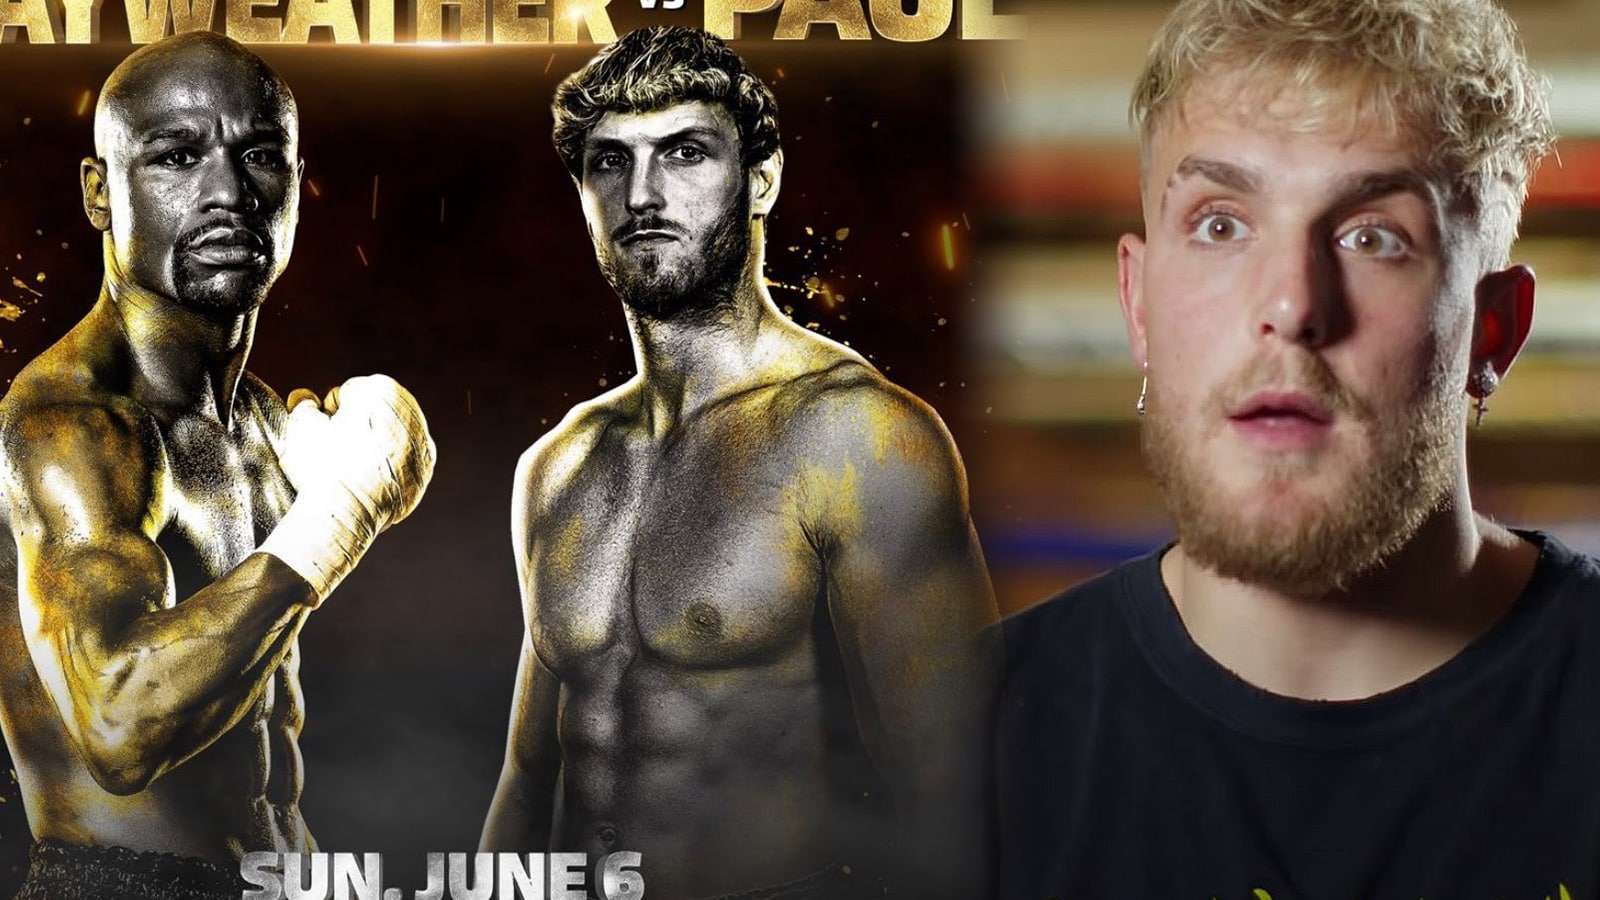 Jake Paul could be banned from Logan Paul vs Mayweather